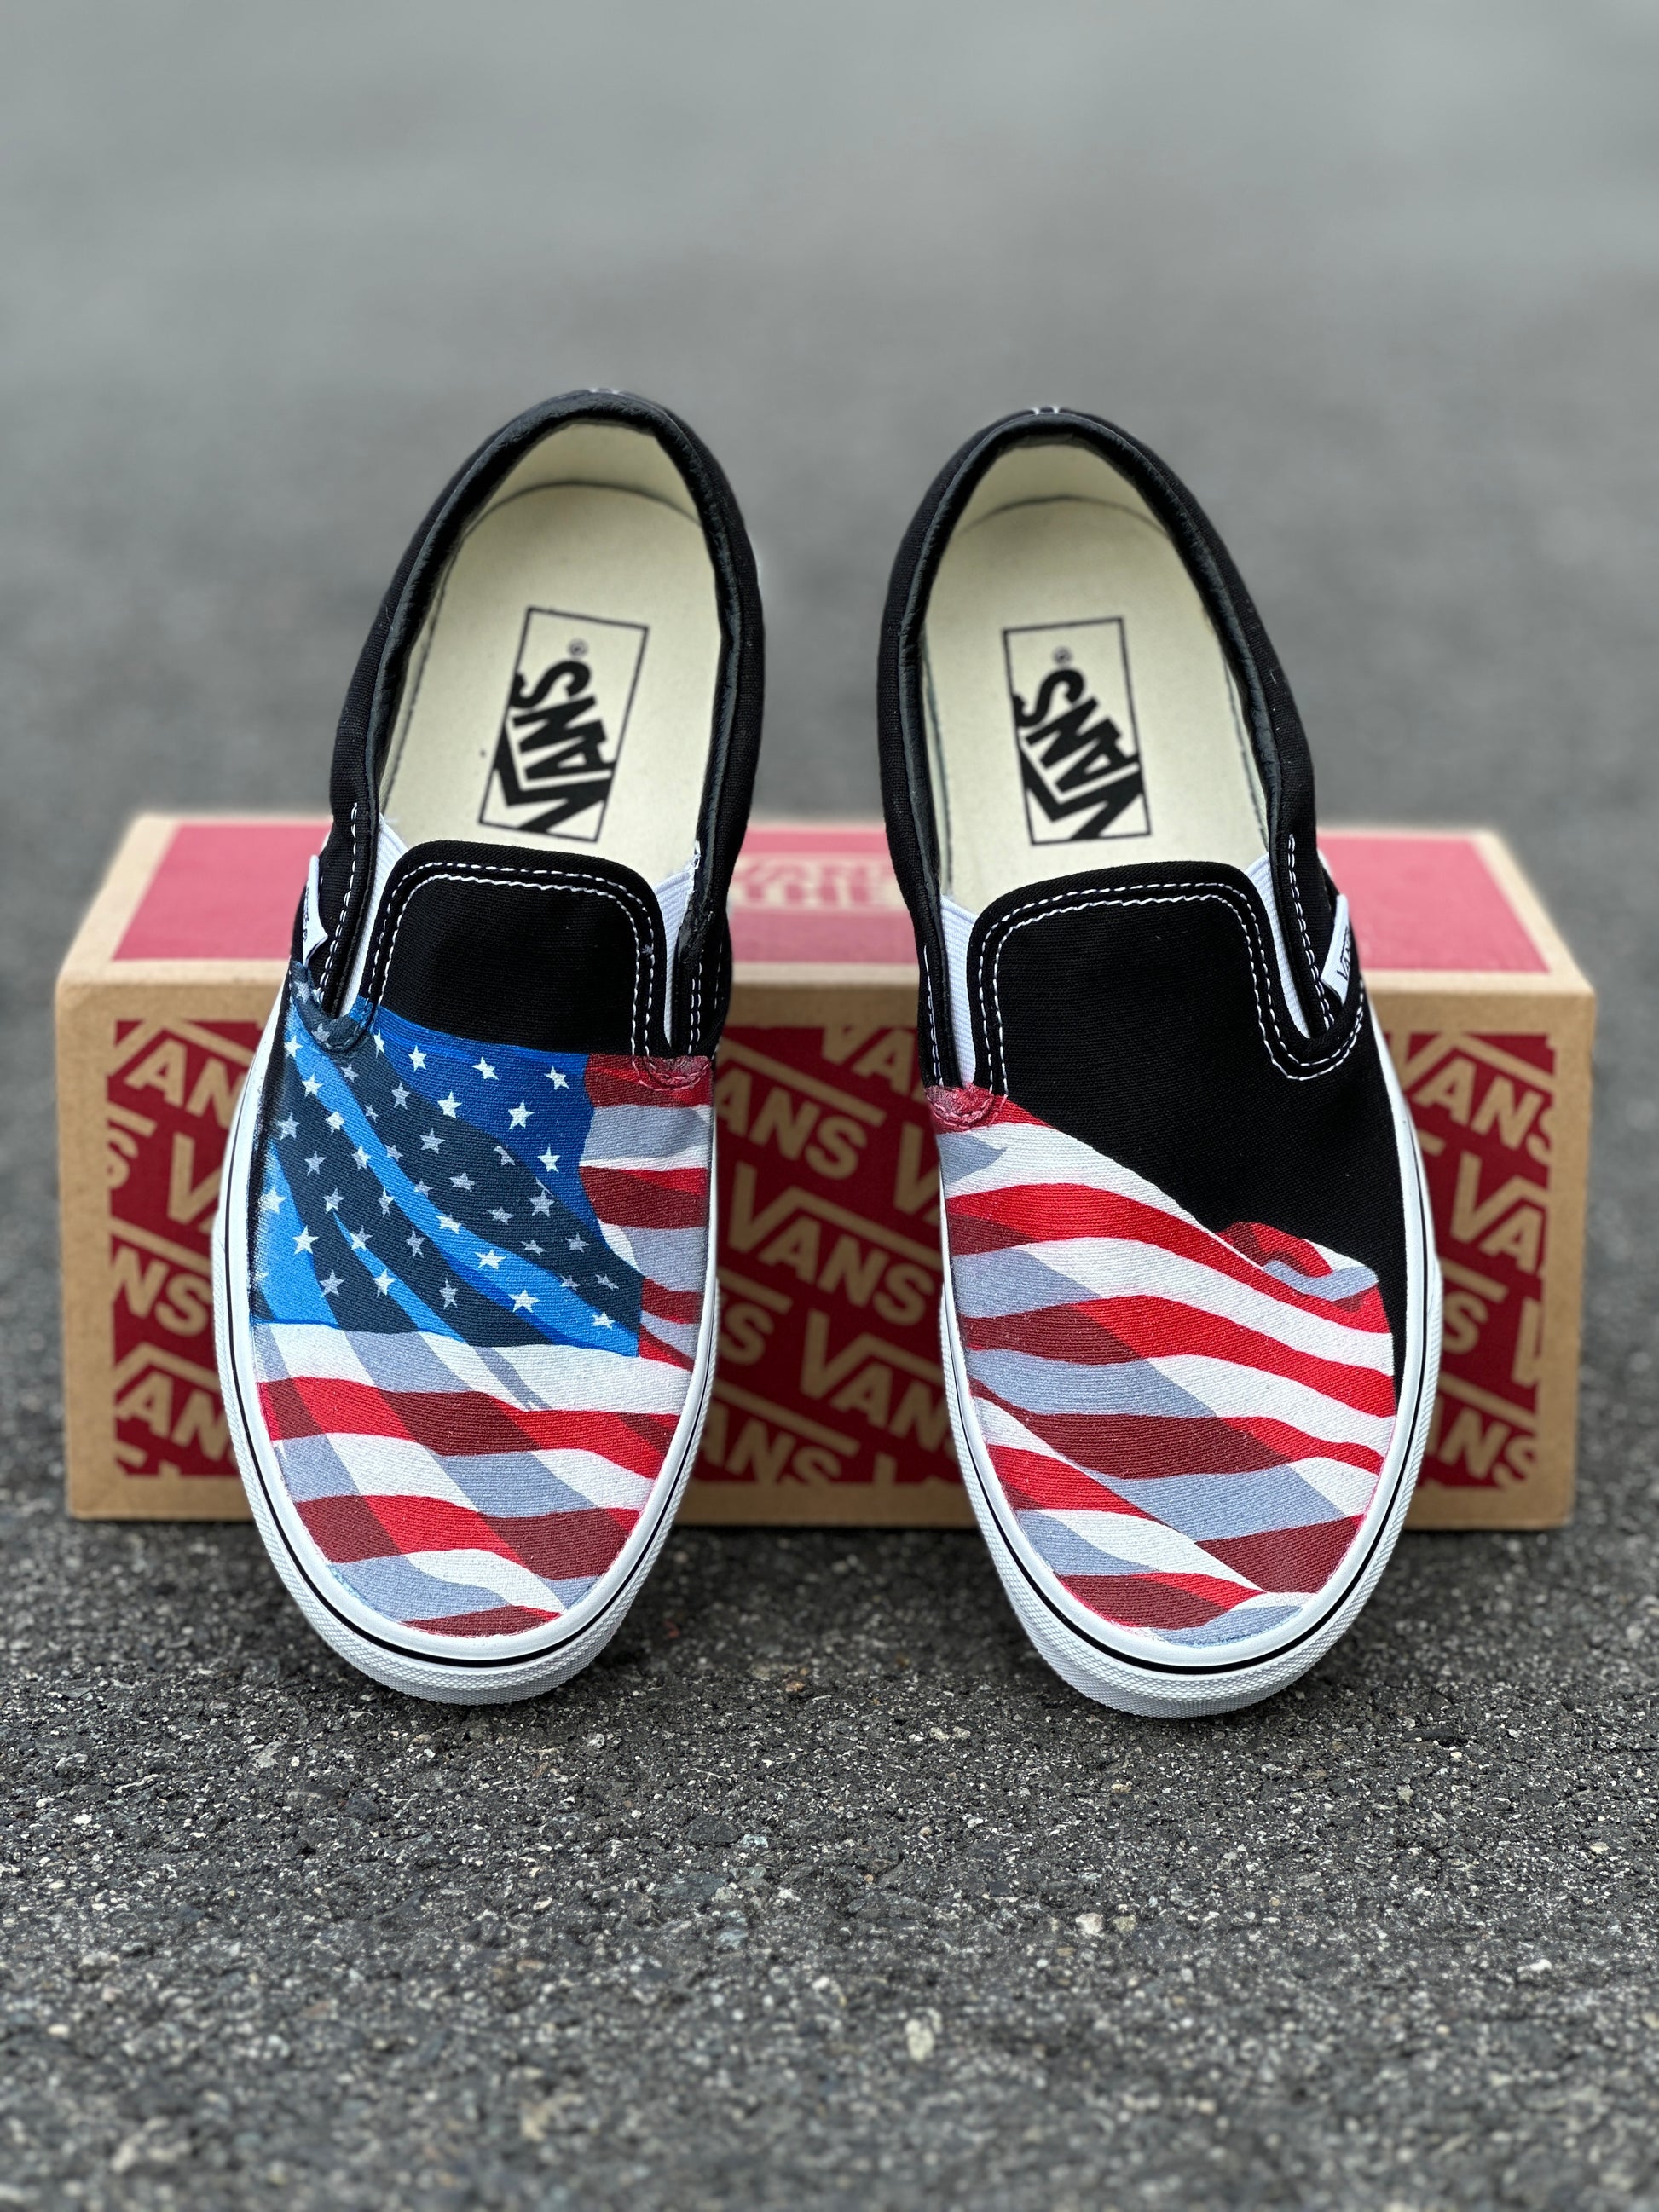 Black Slip On Vans Shoes for Men and Women Featuring American Flag Made in USA - Custom Vans Shoes